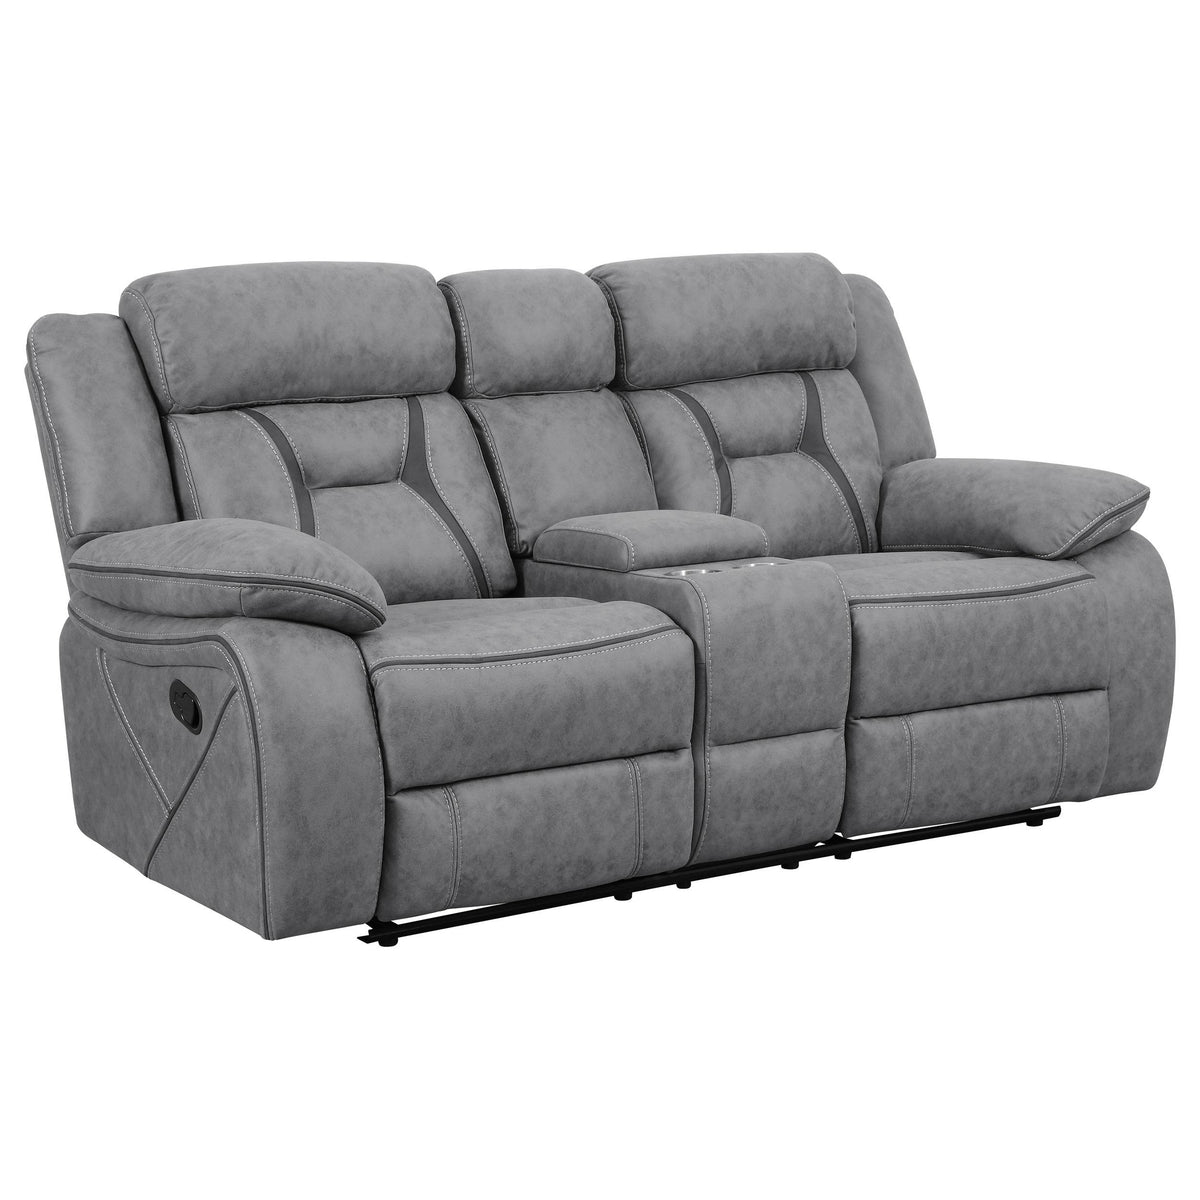 Higgins Pillow Top Arm Motion Loveseat with Console Grey  Las Vegas Furniture Stores